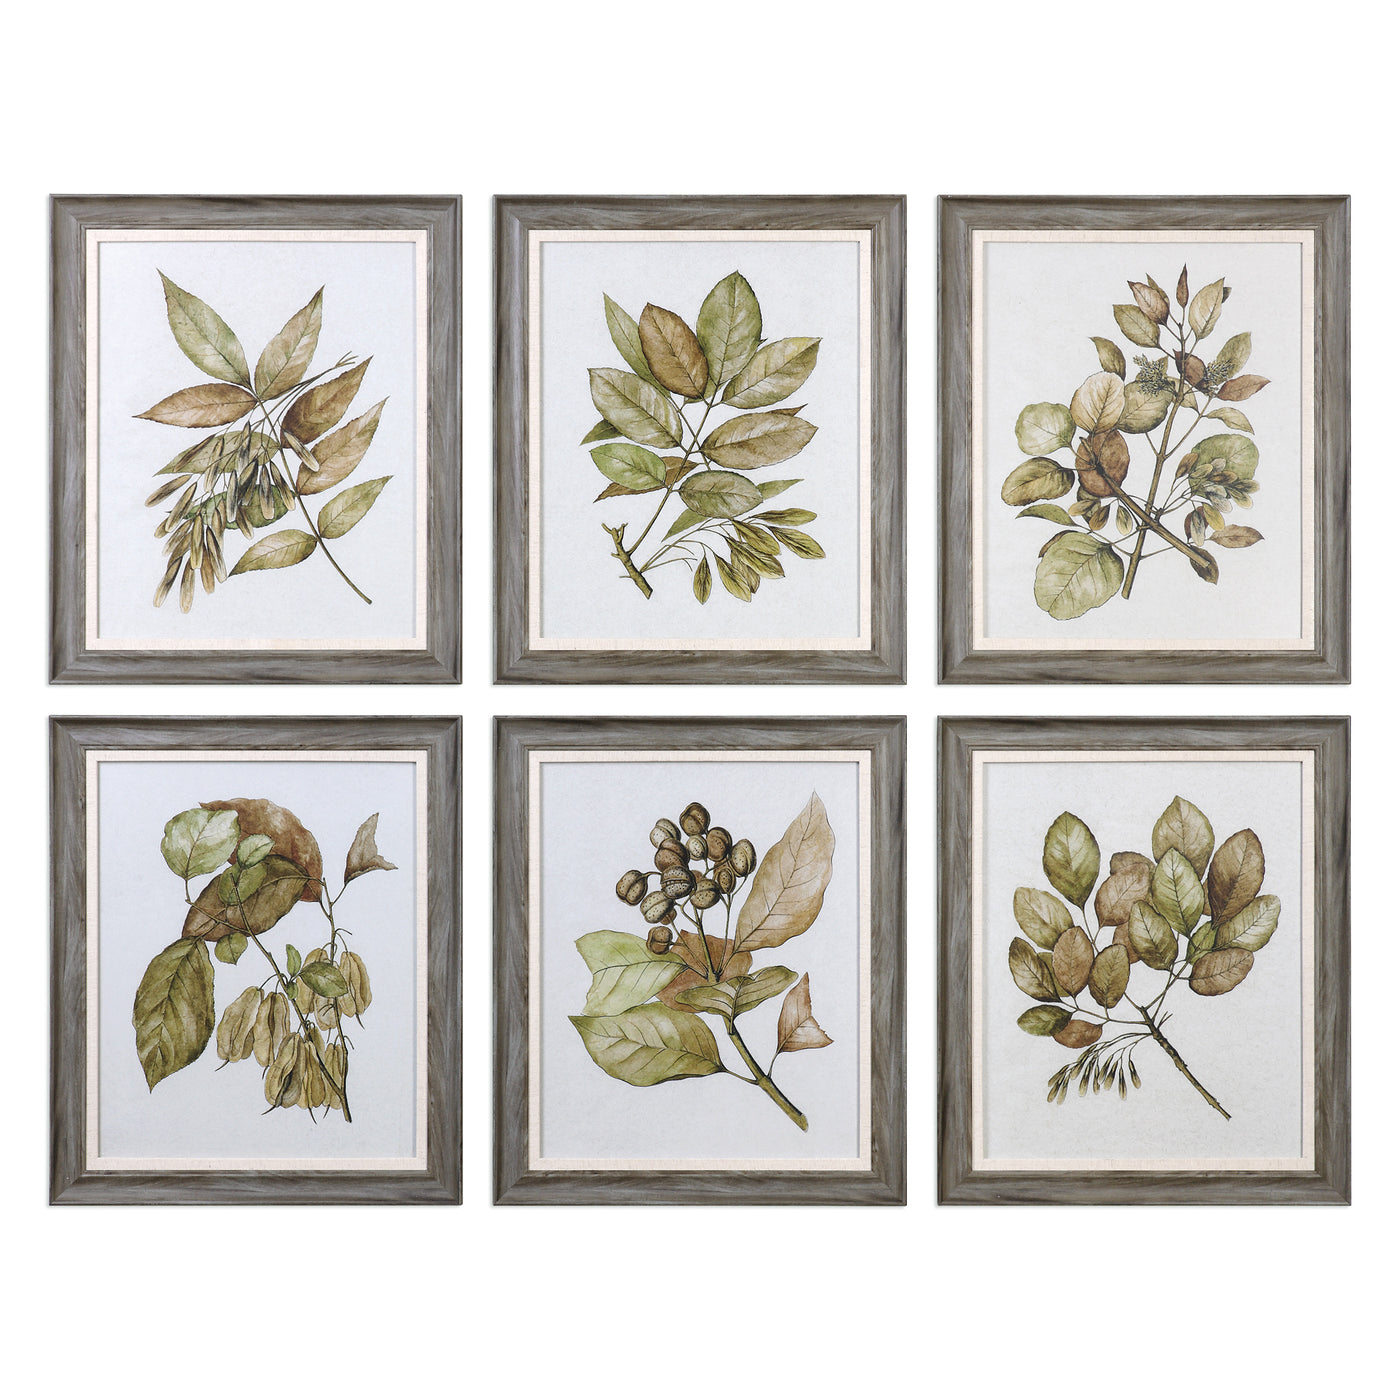 Straying From The Classic Botanical Print, This Art Set Evokes A Masculine Style. Each Is Printed On Parchment Paper And S...